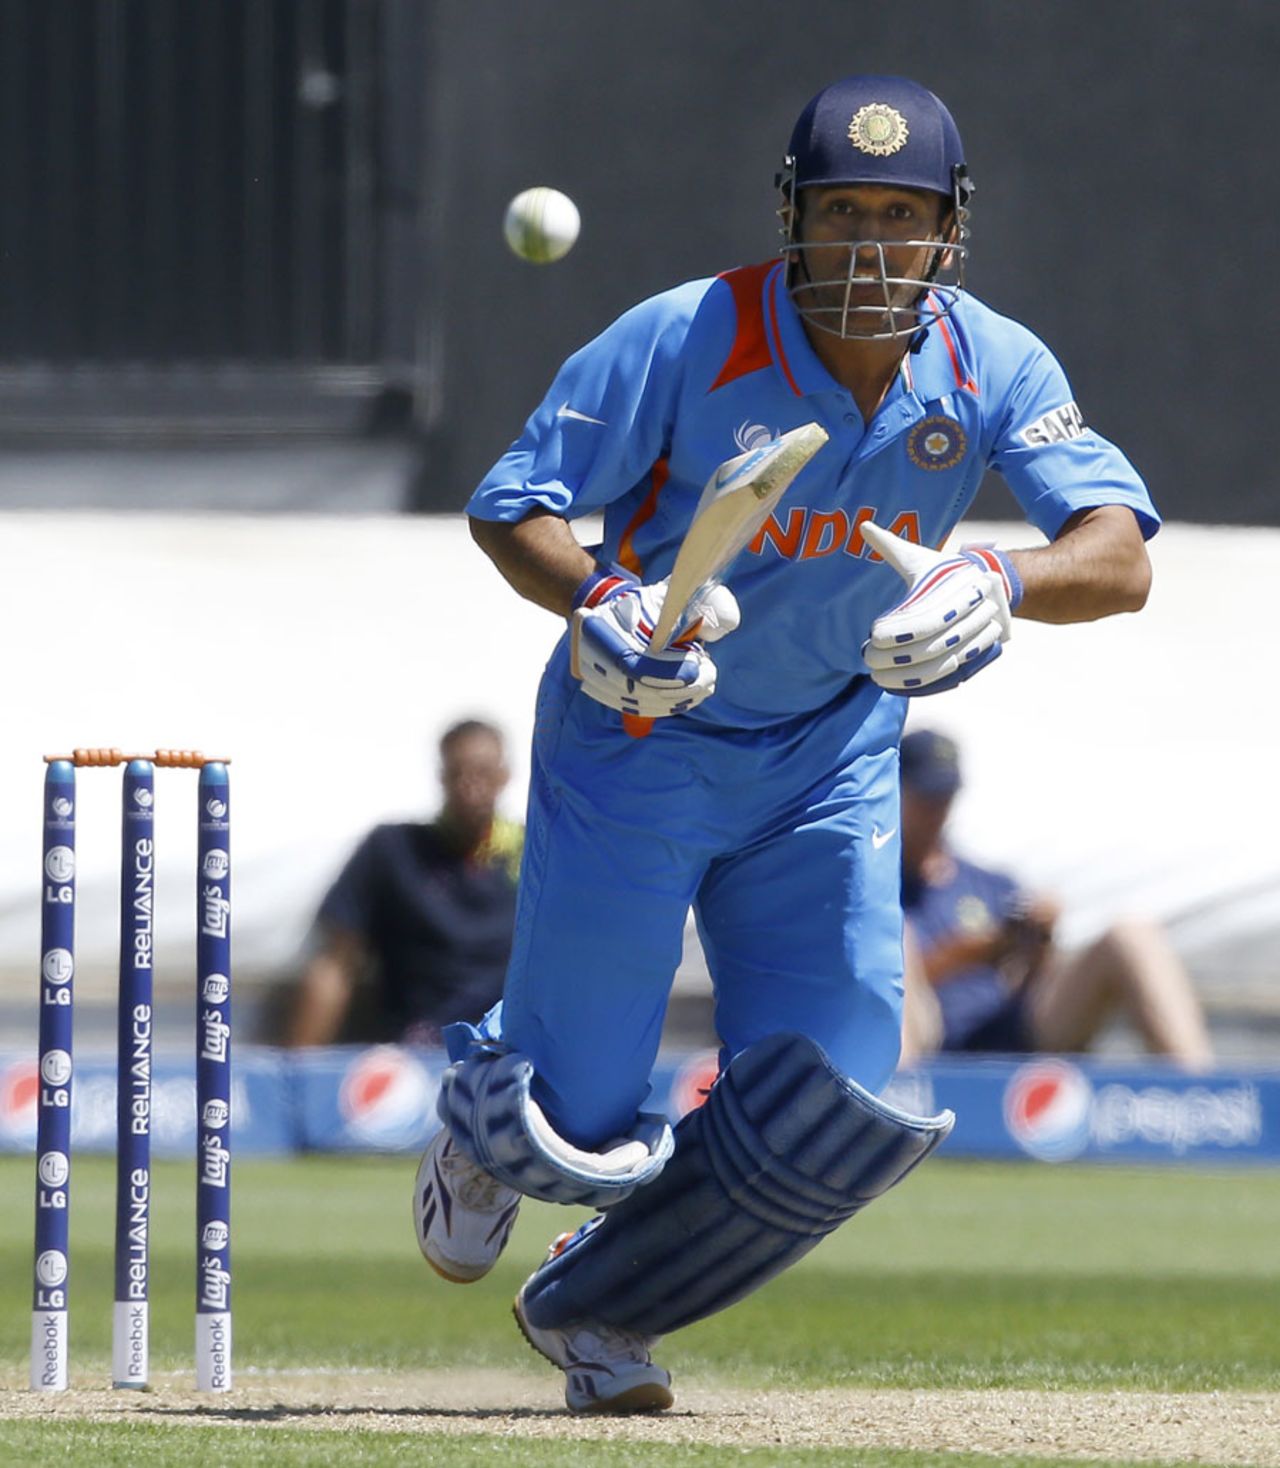 MS Dhoni sets off for a run after playing to the offside, Australia v India, Champions Trophy warm-up, Cardiff, June 4, 2013
